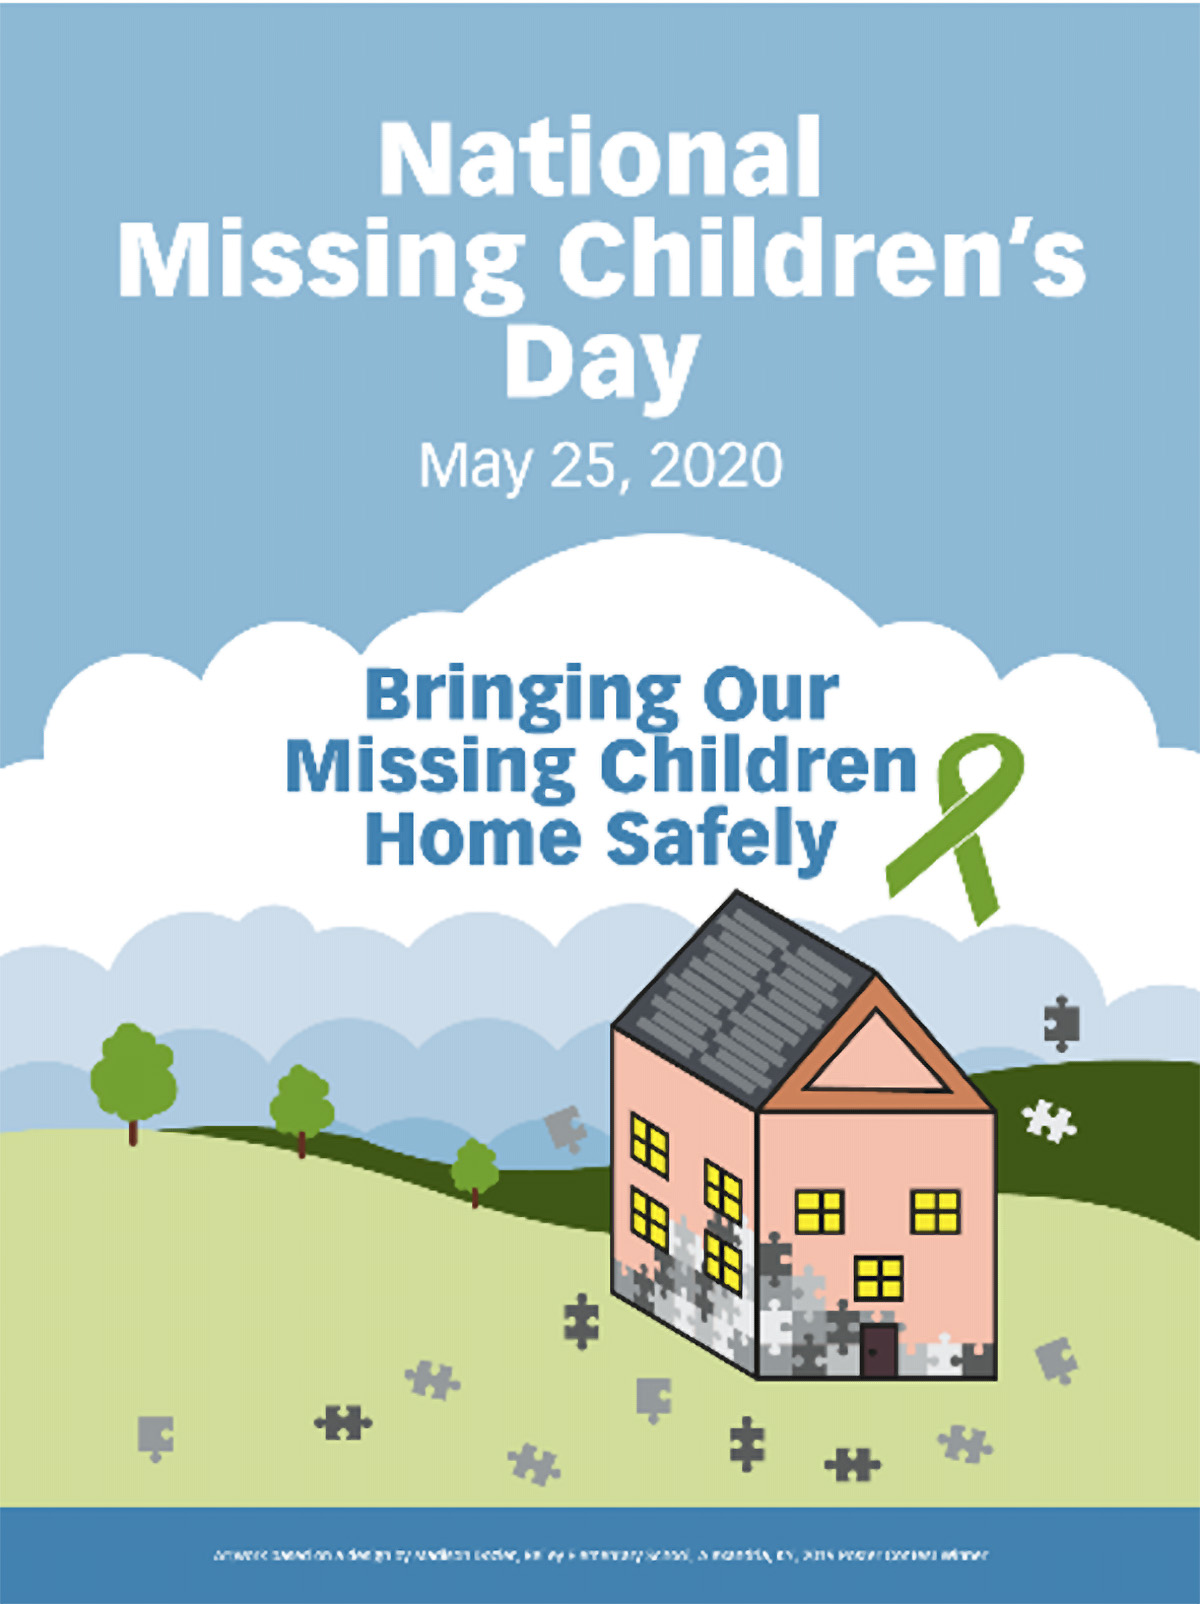 OJJDP’s 2020 National Missing Children’s Day campaign poster